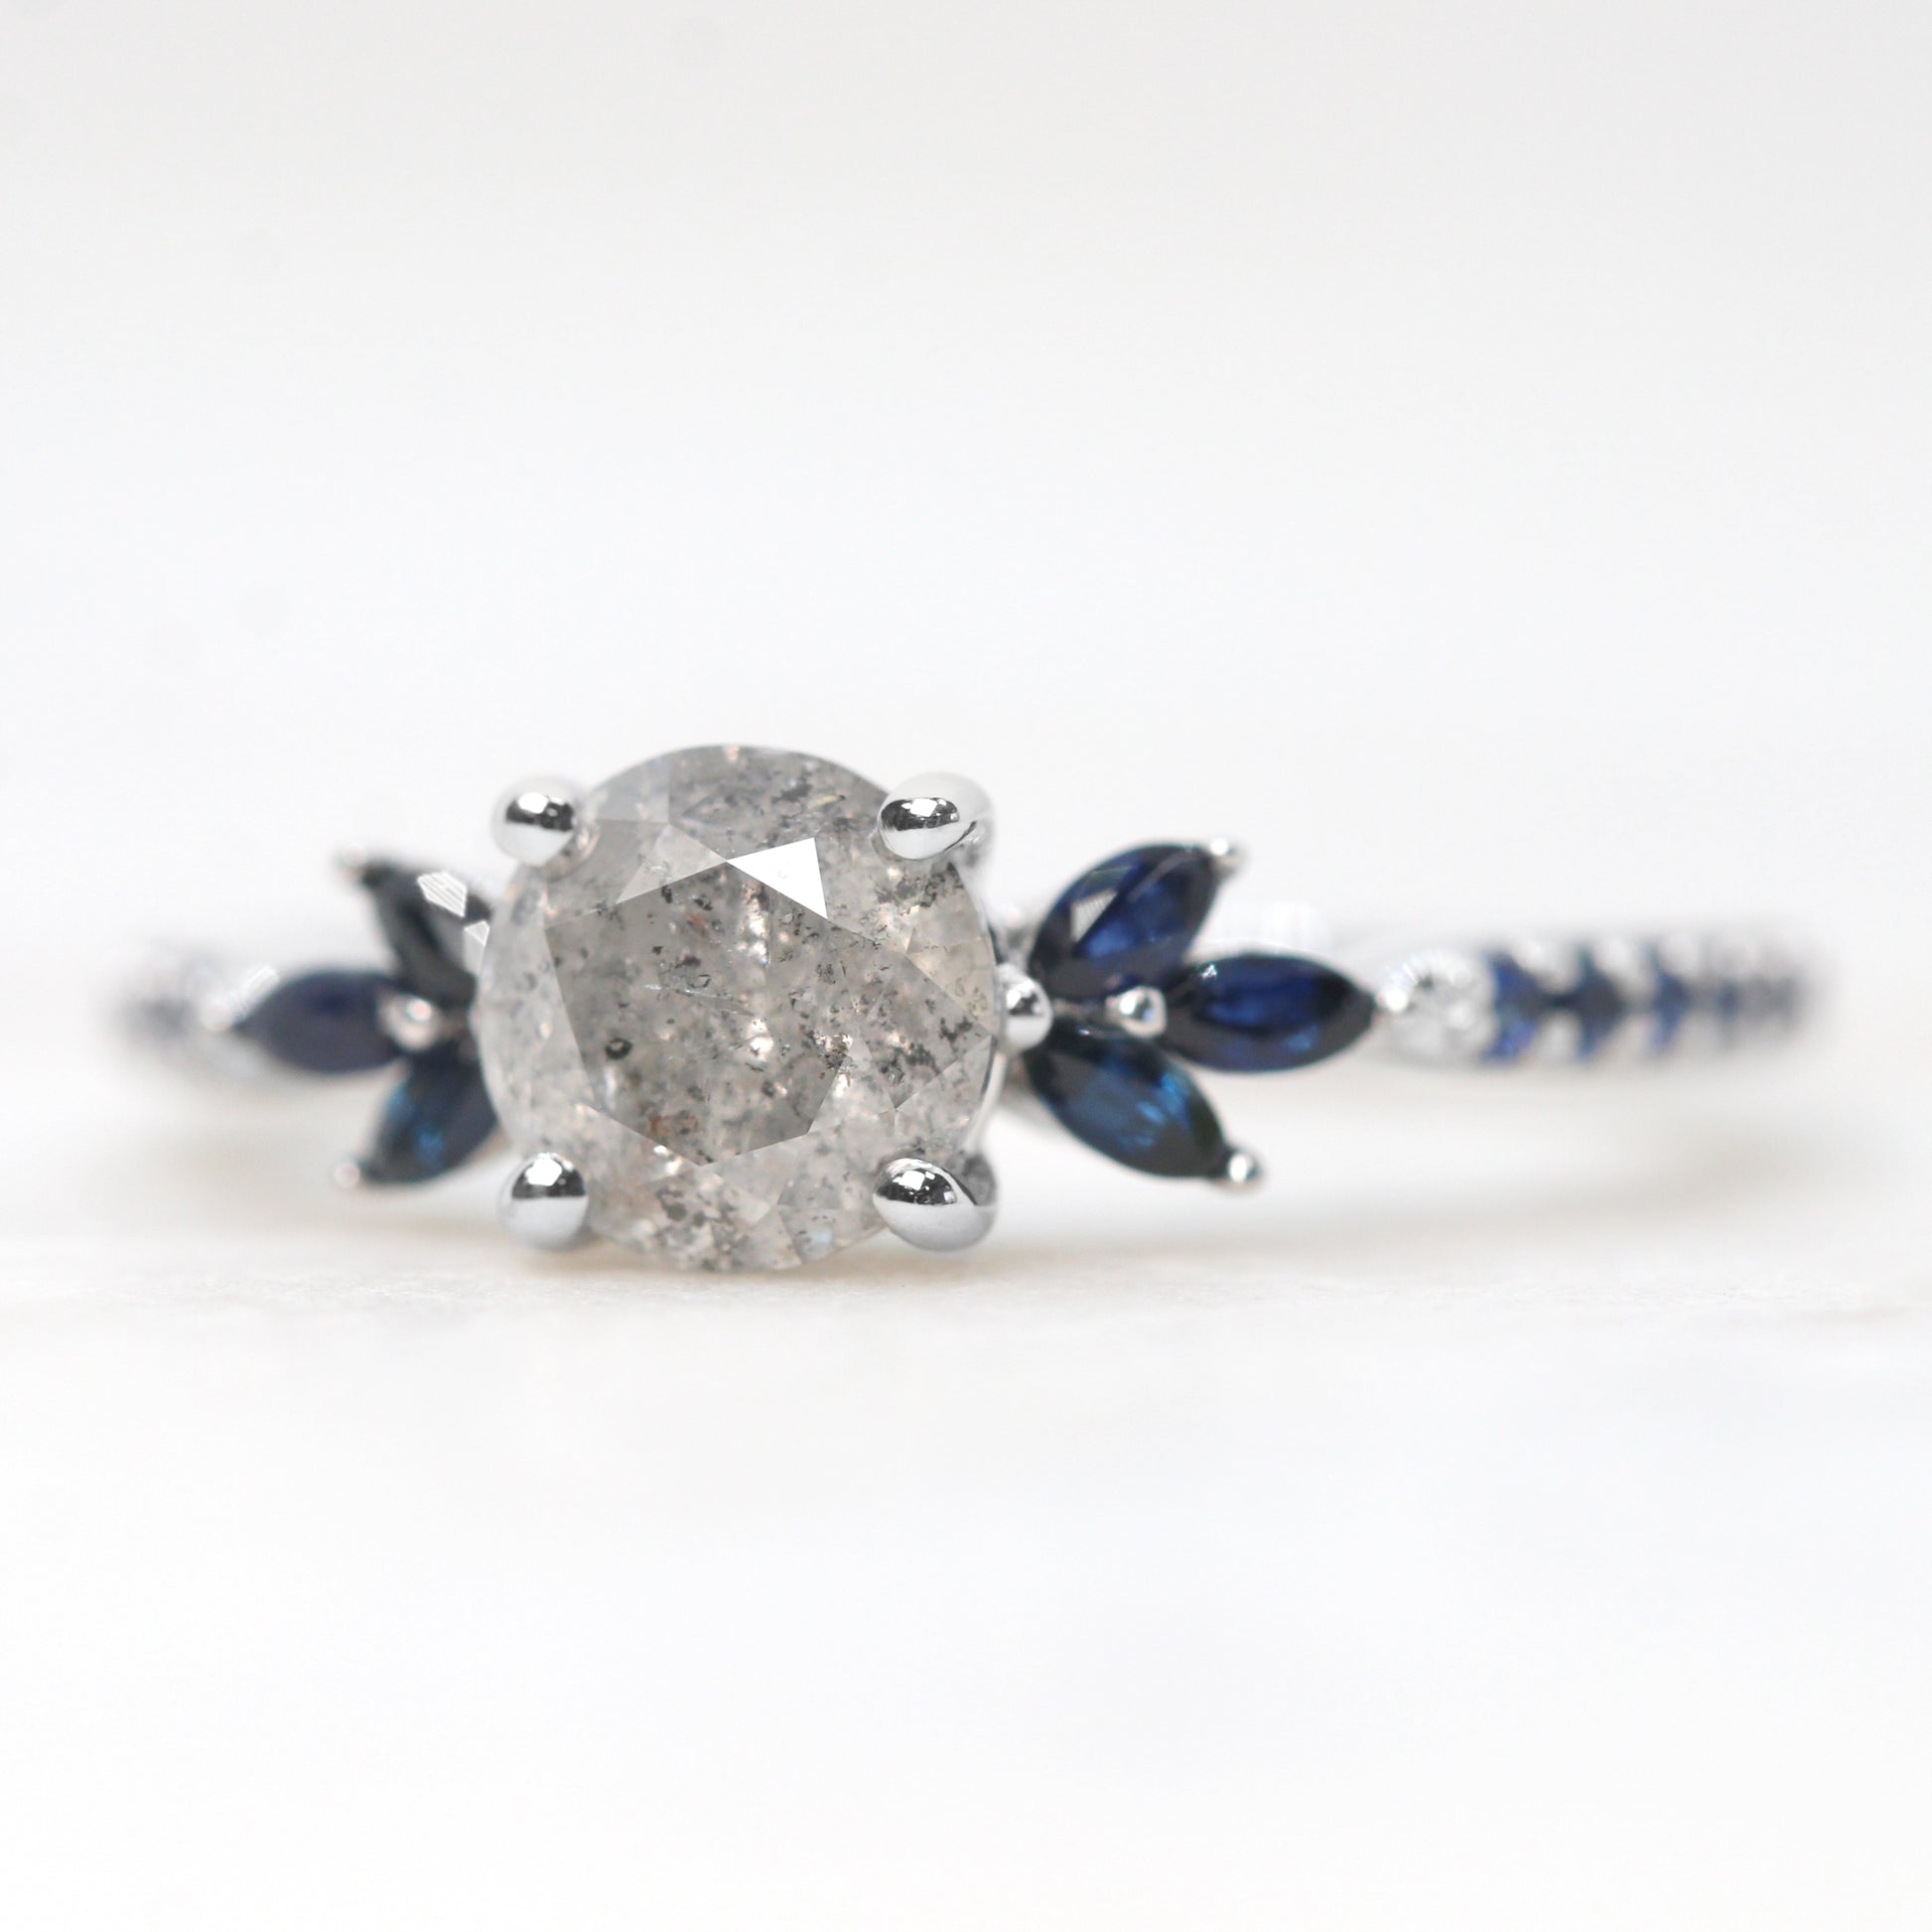 Betty Ring with a 1.11 Carat Round Light Gray Celestial Diamond and Blue Accent Sapphires in 14k White Gold - Ready to Size and Ship - Midwinter Co. Alternative Bridal Rings and Modern Fine Jewelry